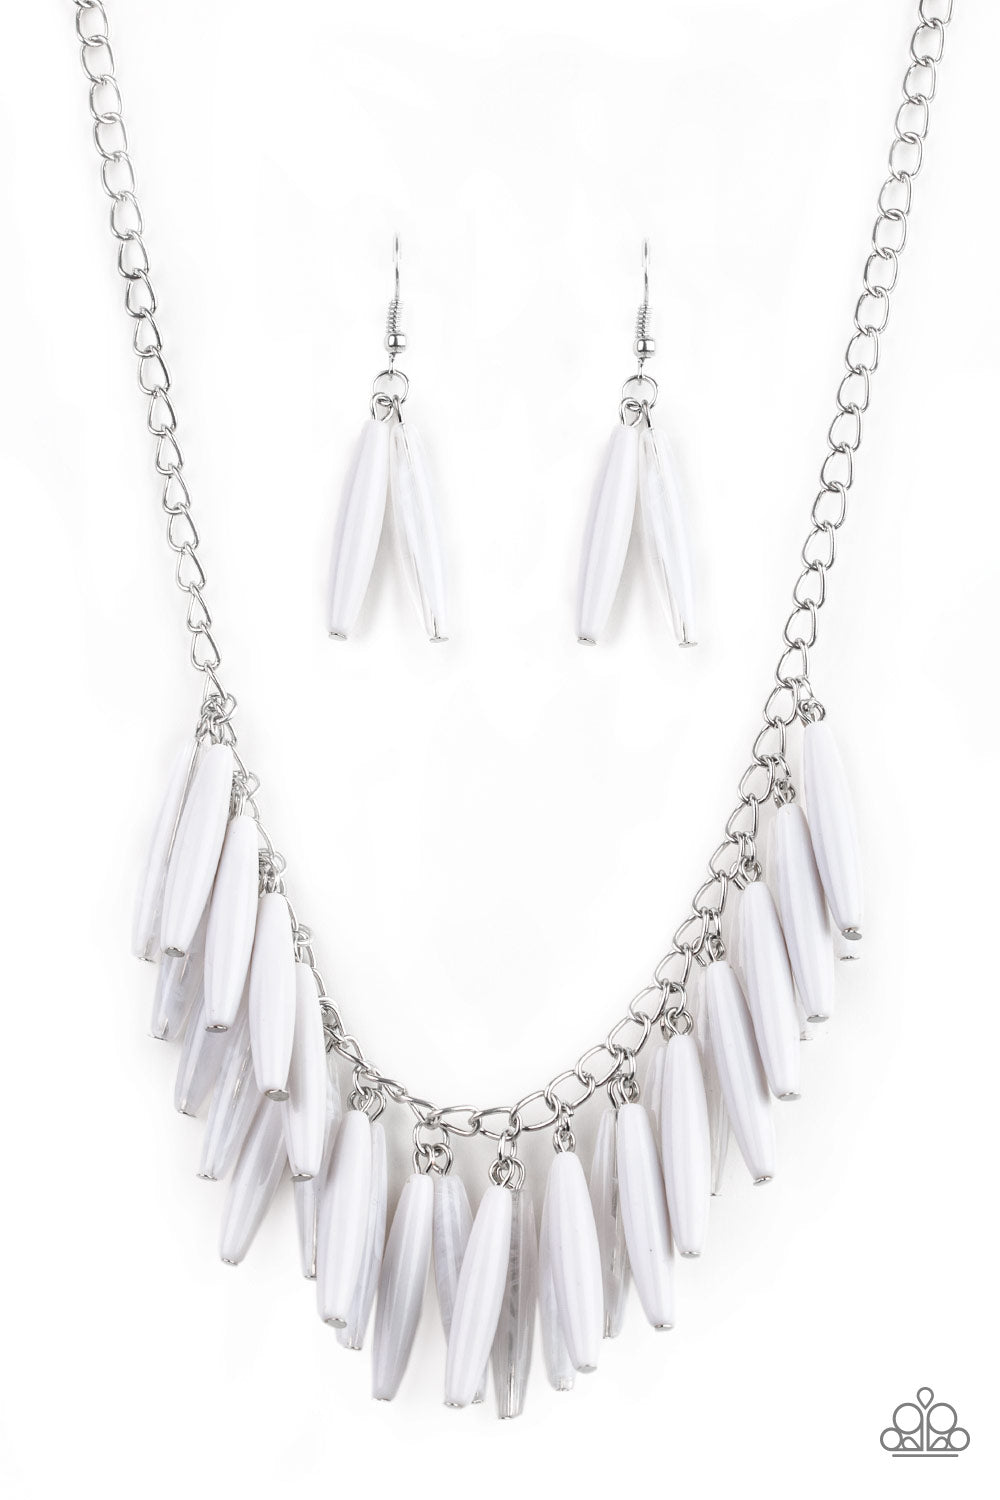 Full of Flavor - white - Paparazzi necklace